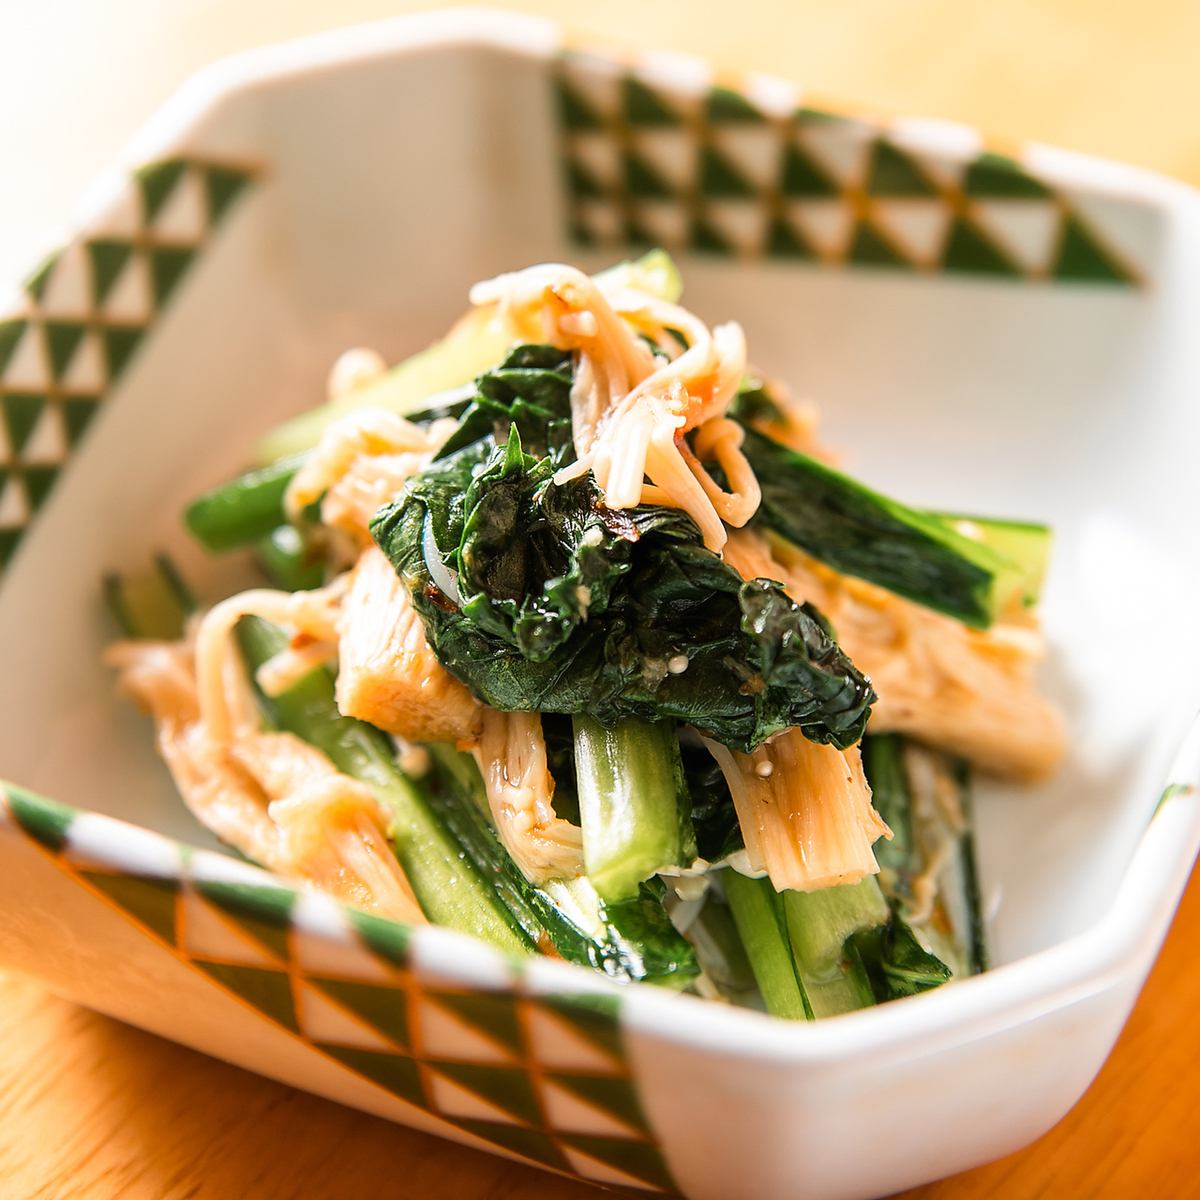 Enjoy a variety of dishes made with seasonal vegetables.